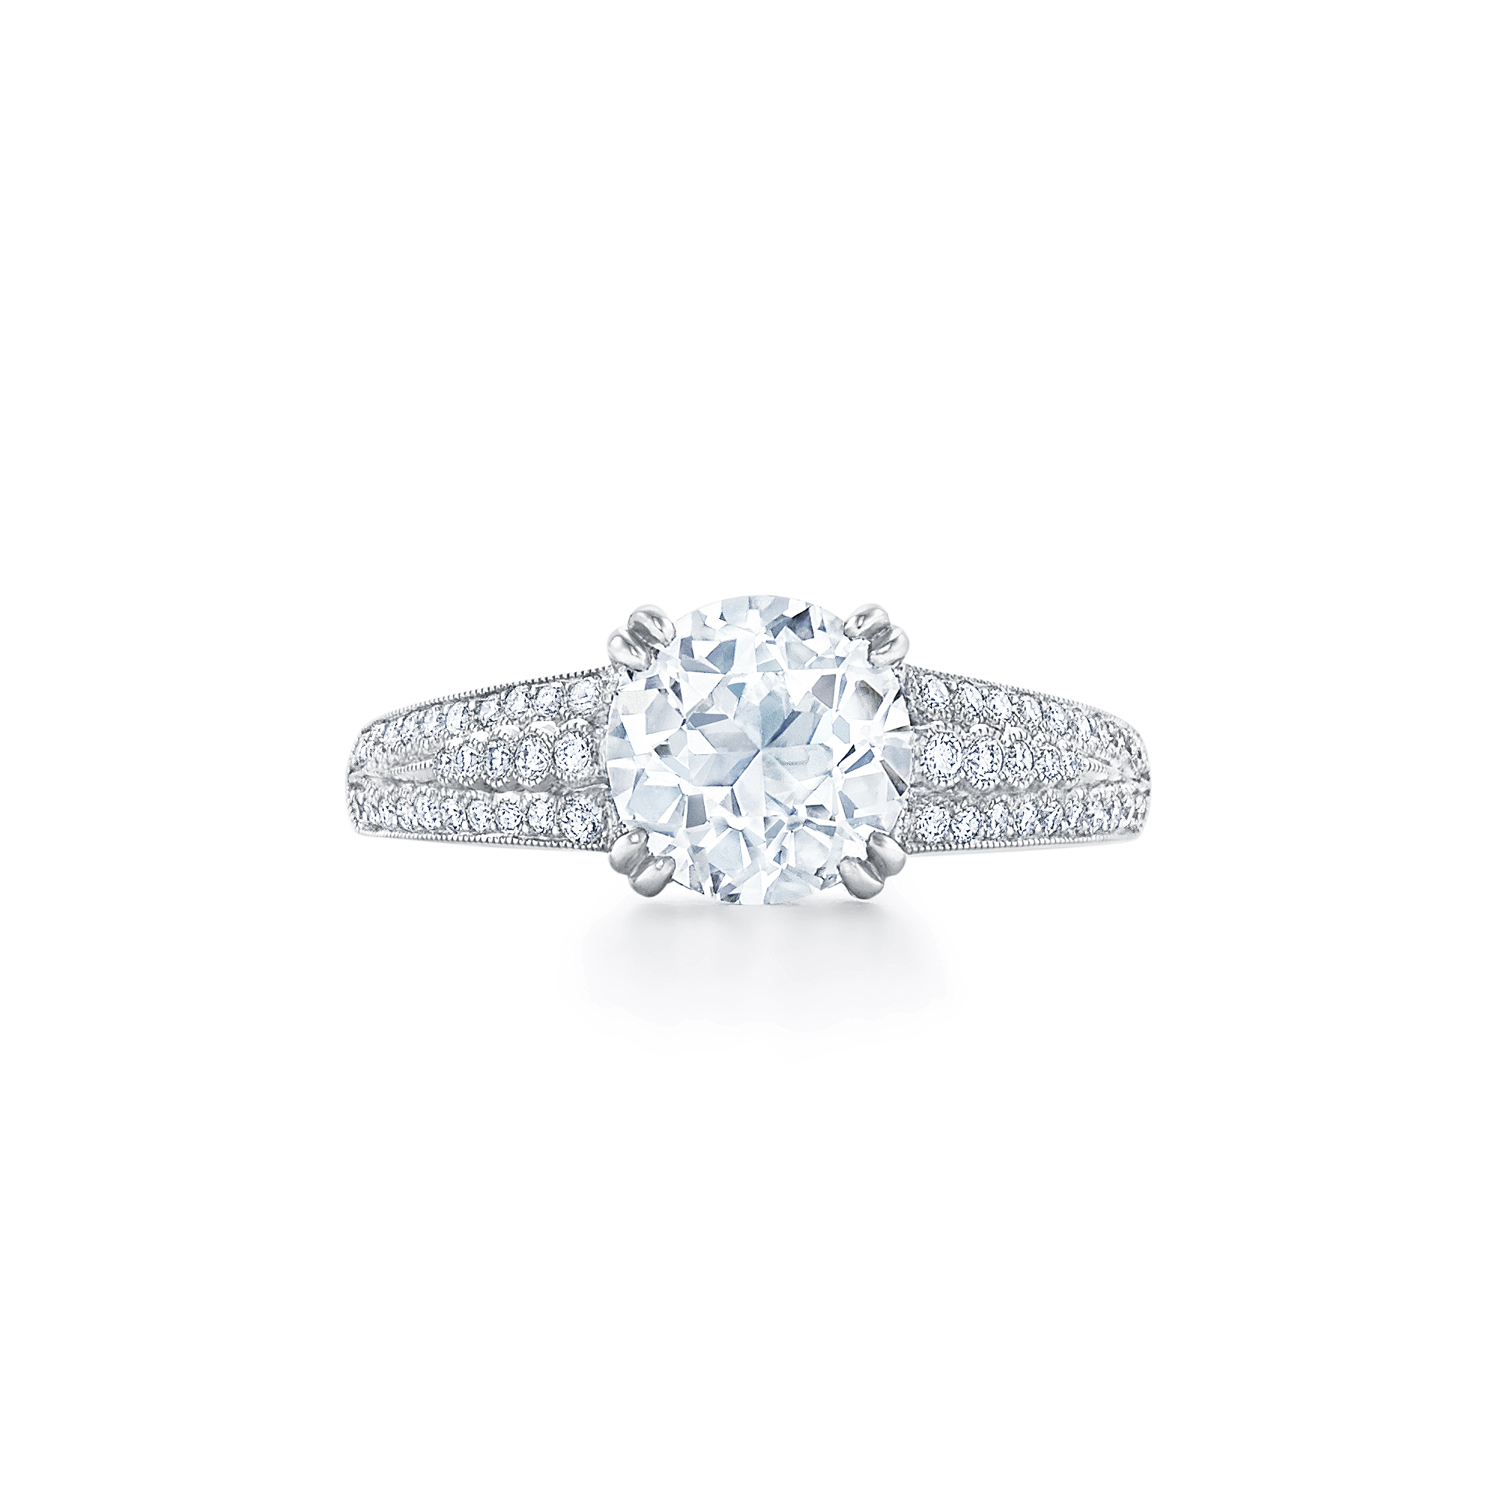 Fred Leighton Round Diamond Engagement Ring with a Three Row Band in Platinum, Style F-1041FLOE-0-DIA-PLAT